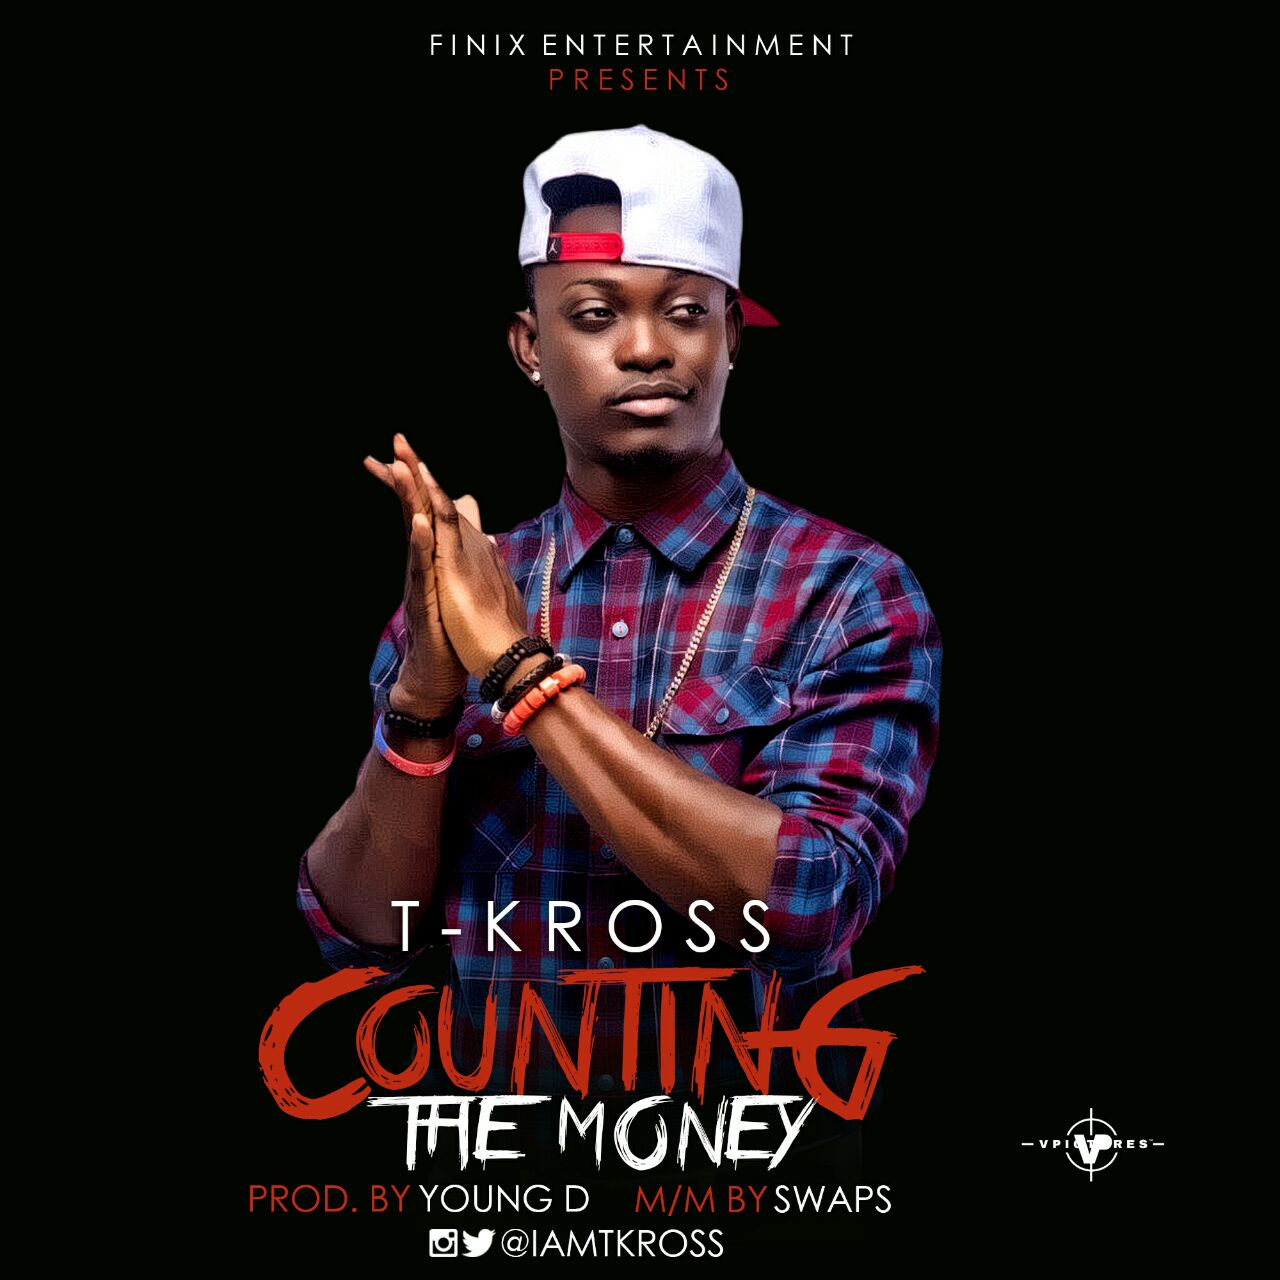 DOWNLOAD TKROSS - COUNTING THE MONEY